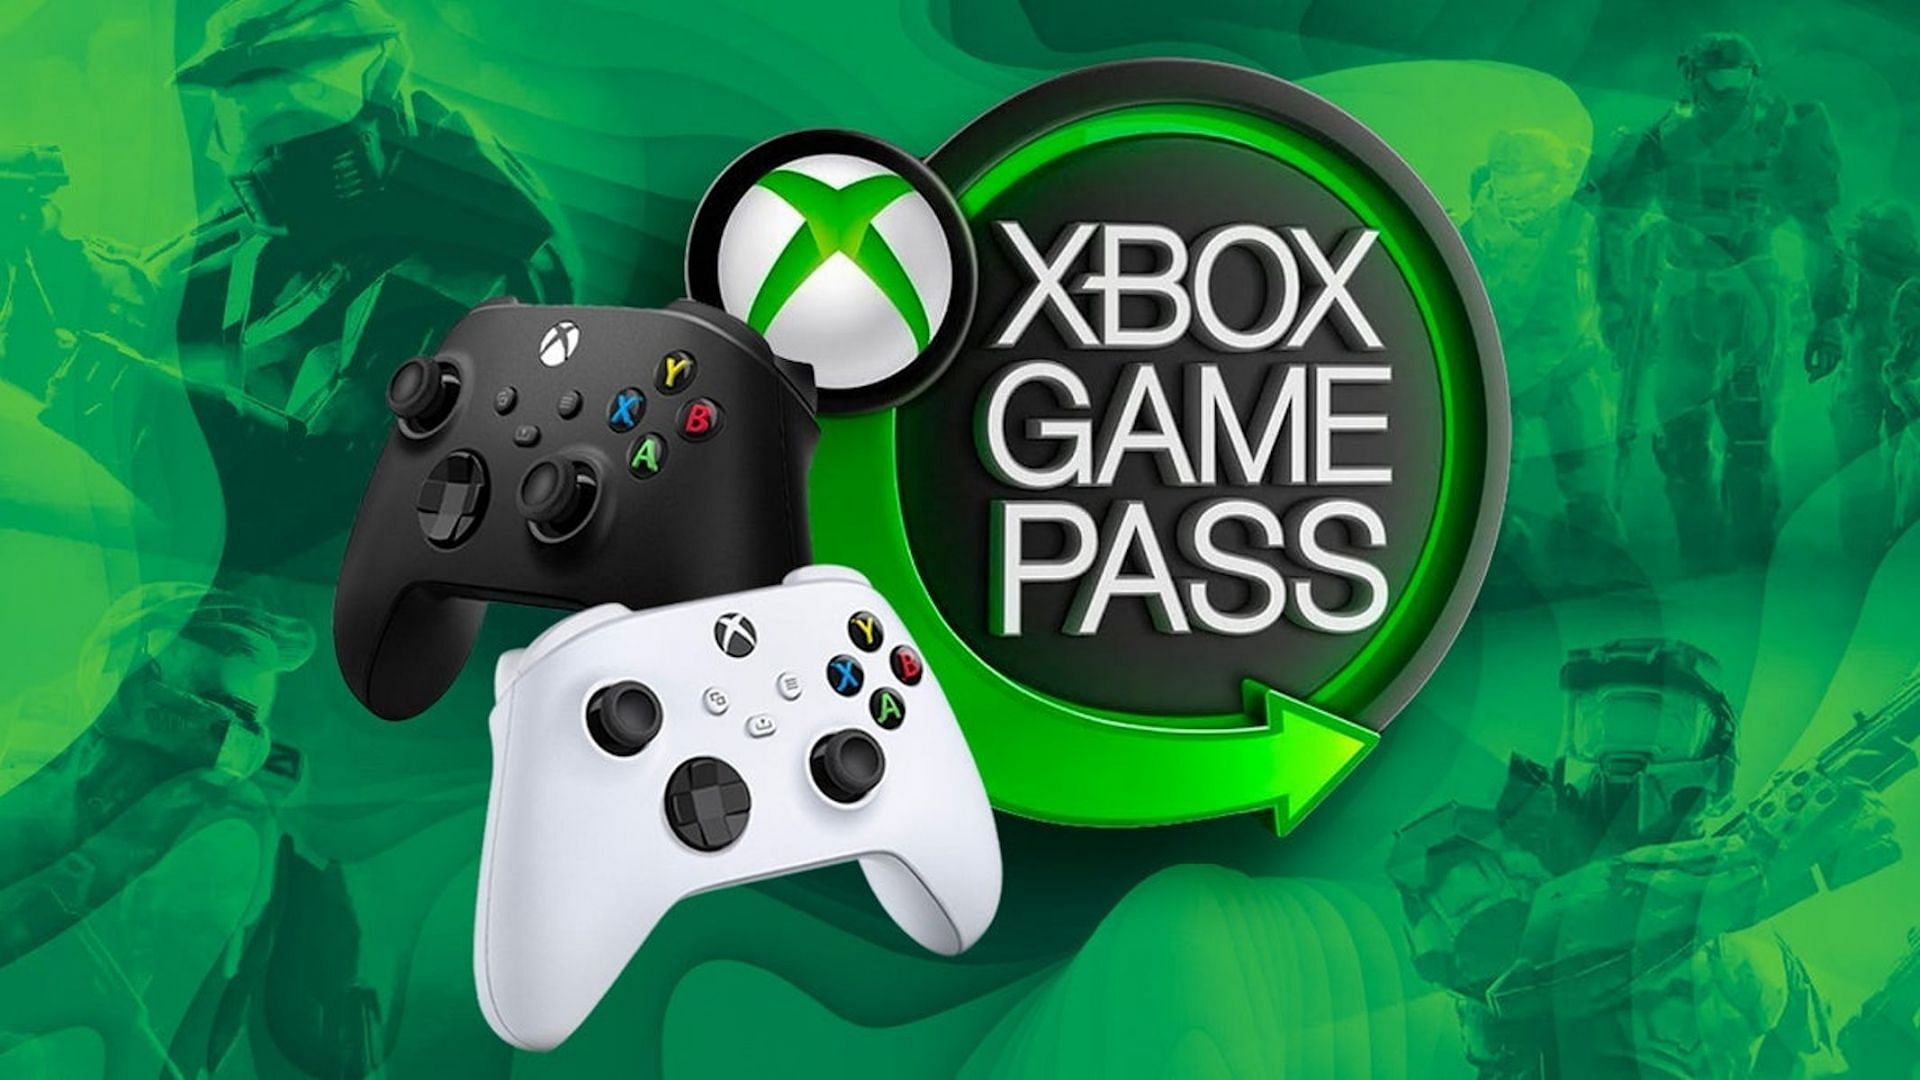 Do you need Xbox Game Pass to play GTA Online?